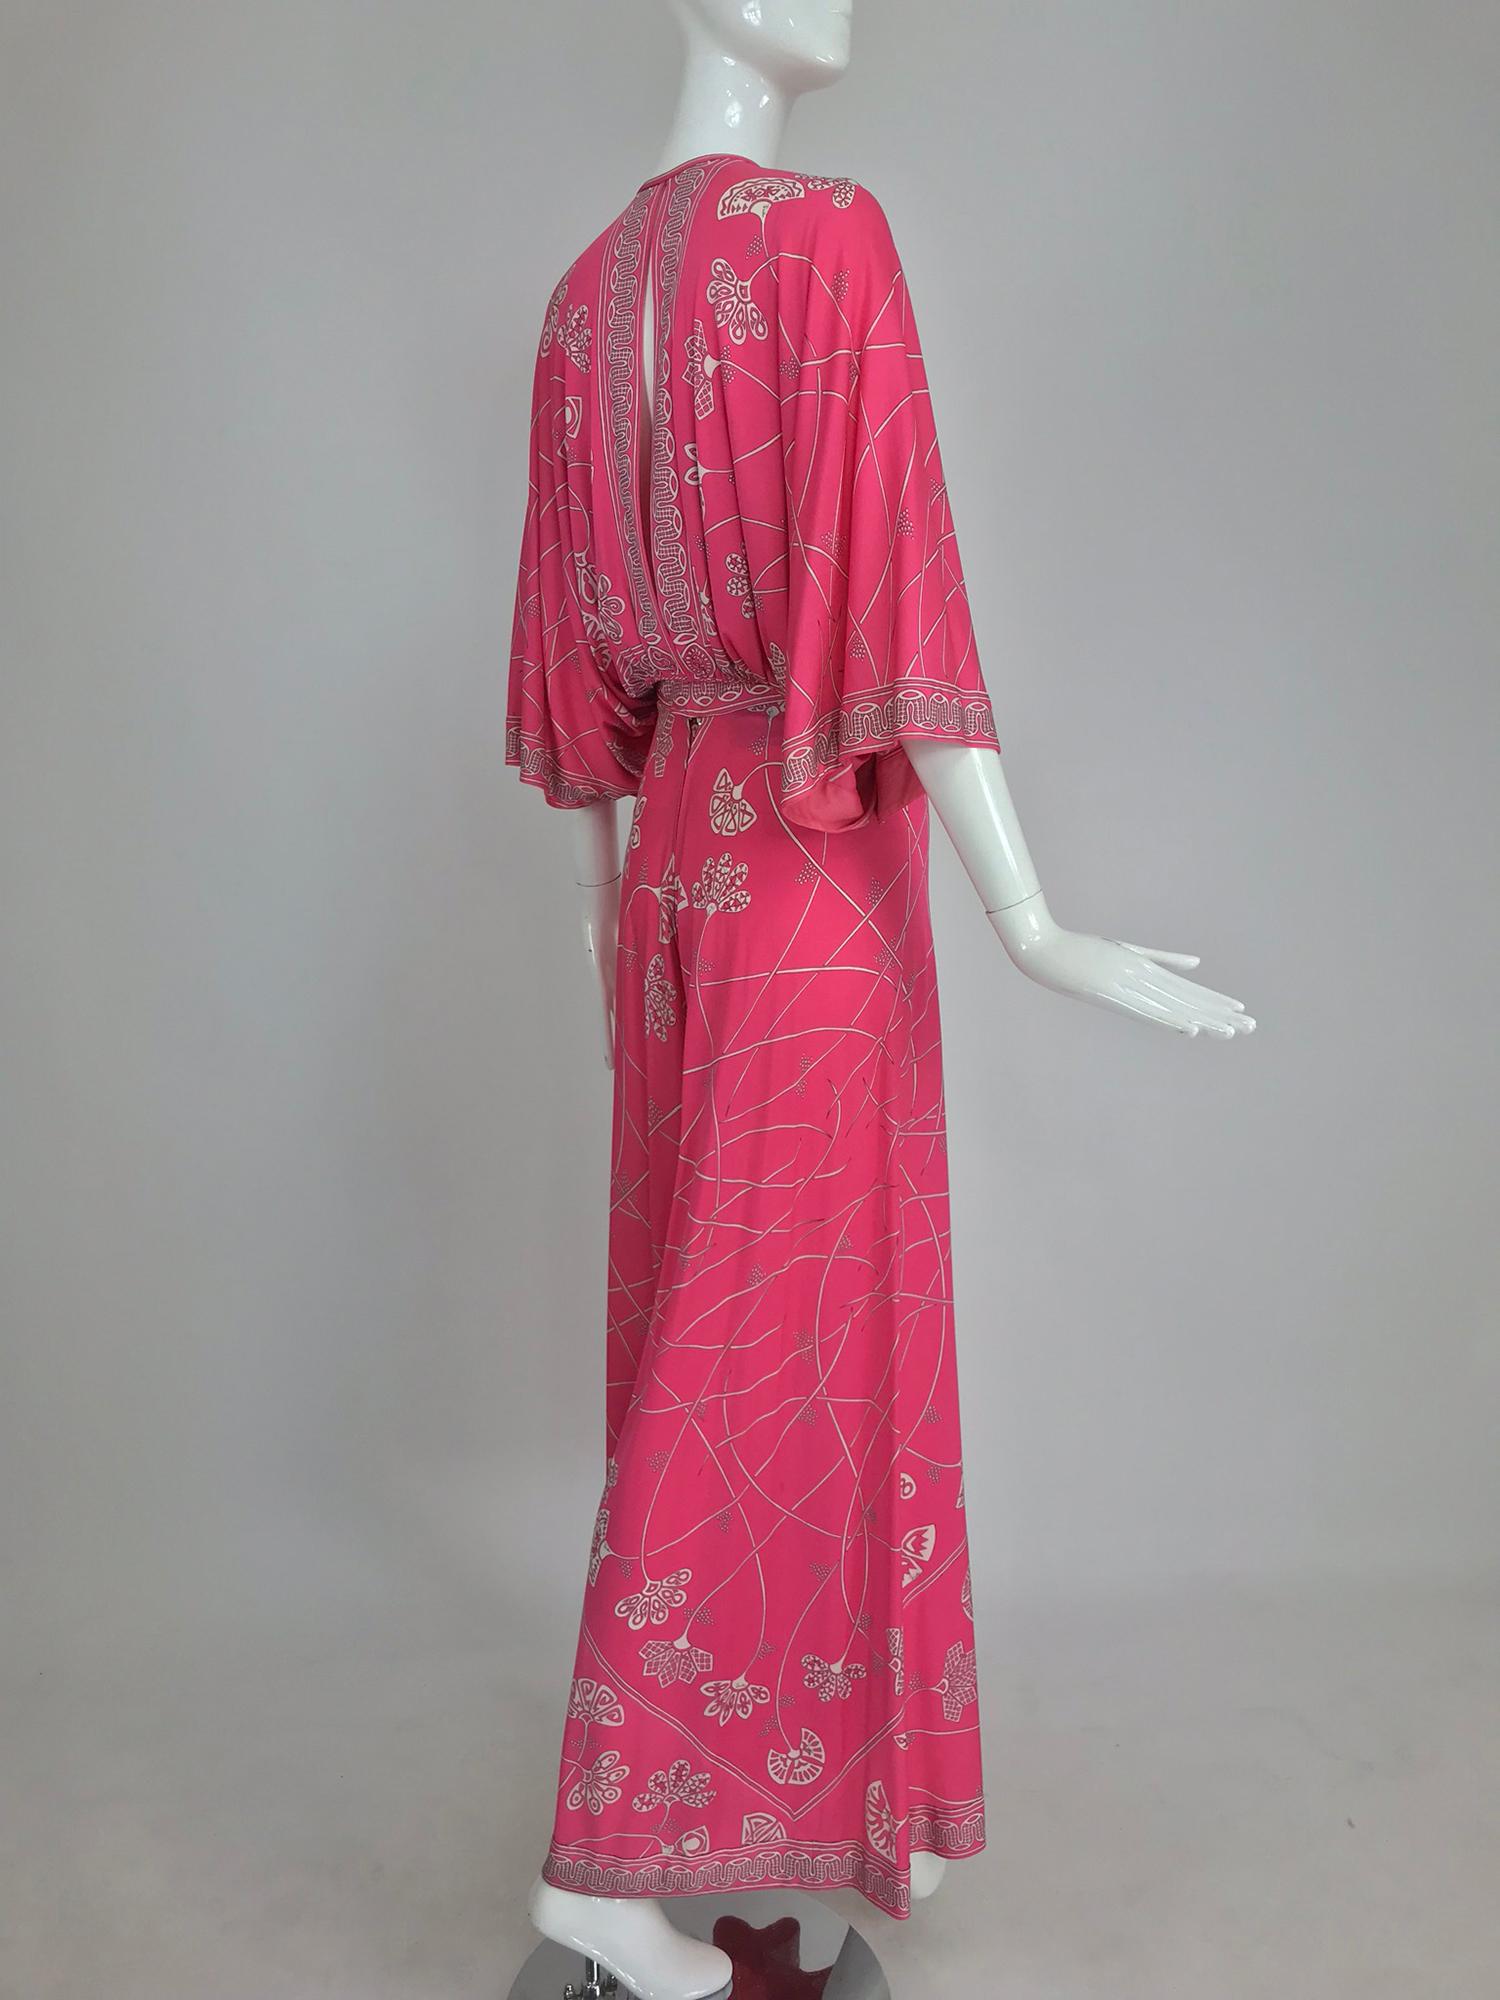 Emilio Pucci silk jersey plunge top and palazzo trousers, 1970s 1